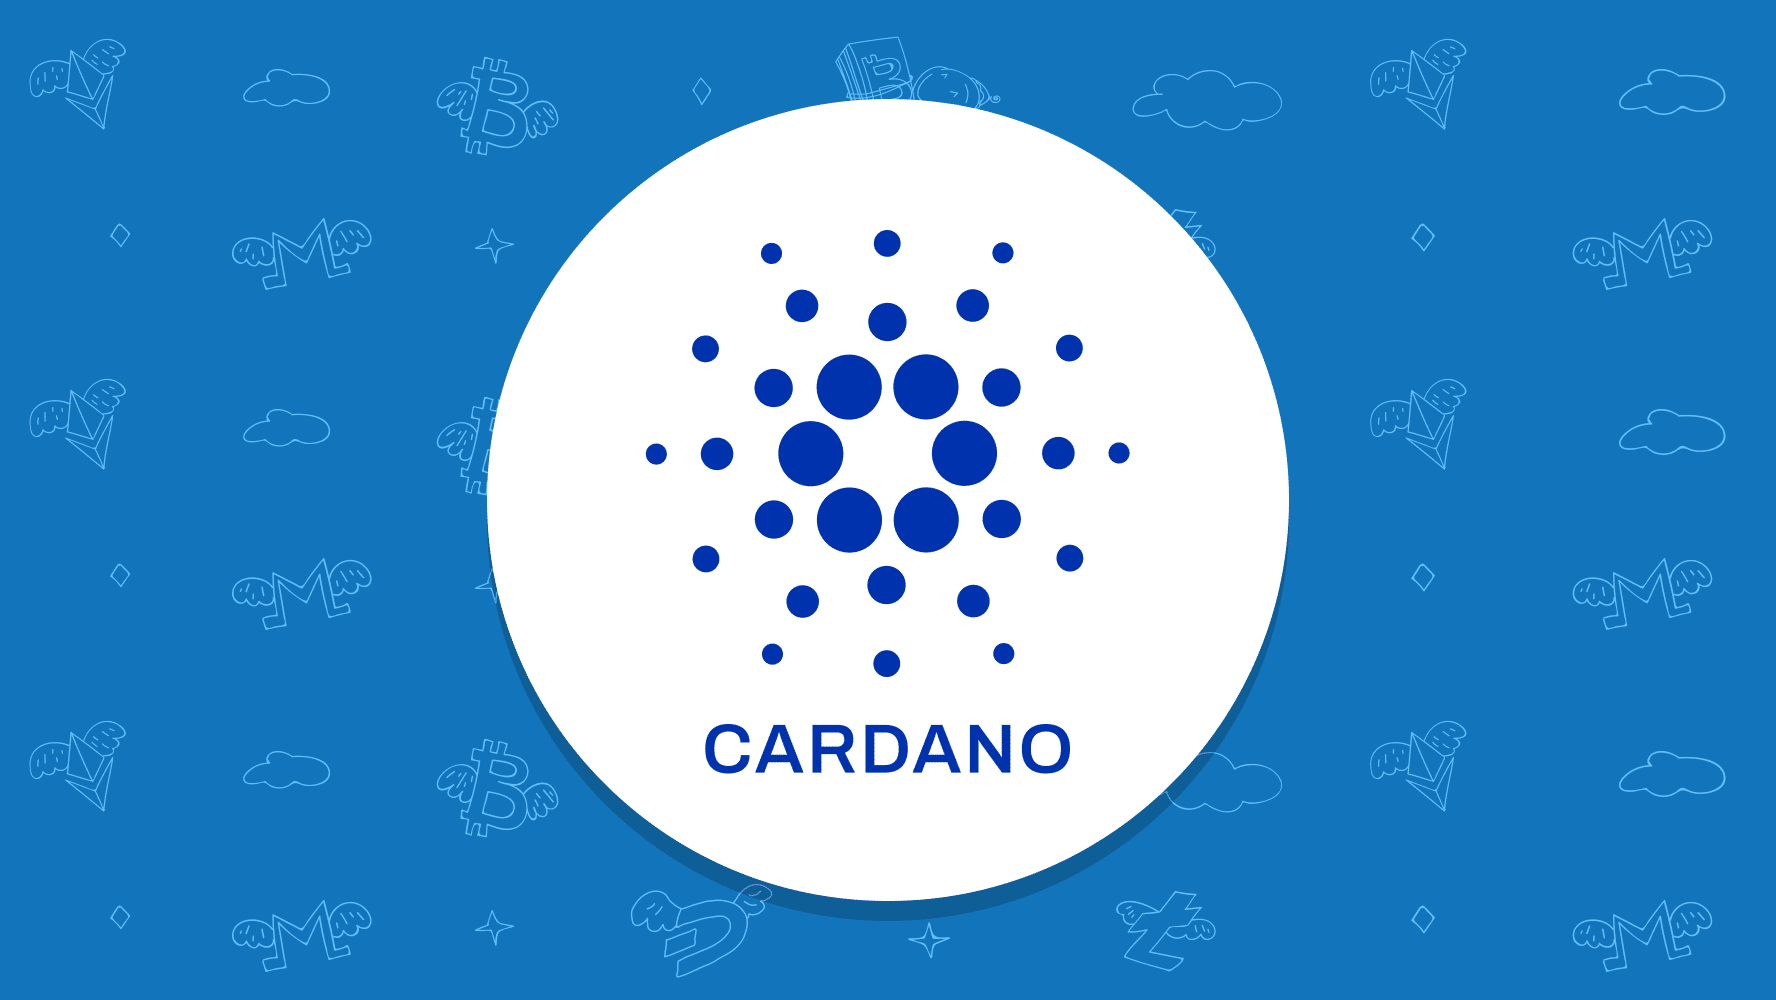 Cardano (ADA) Prints Strong Green Candle – Can its Label Pump to $1 Soon?